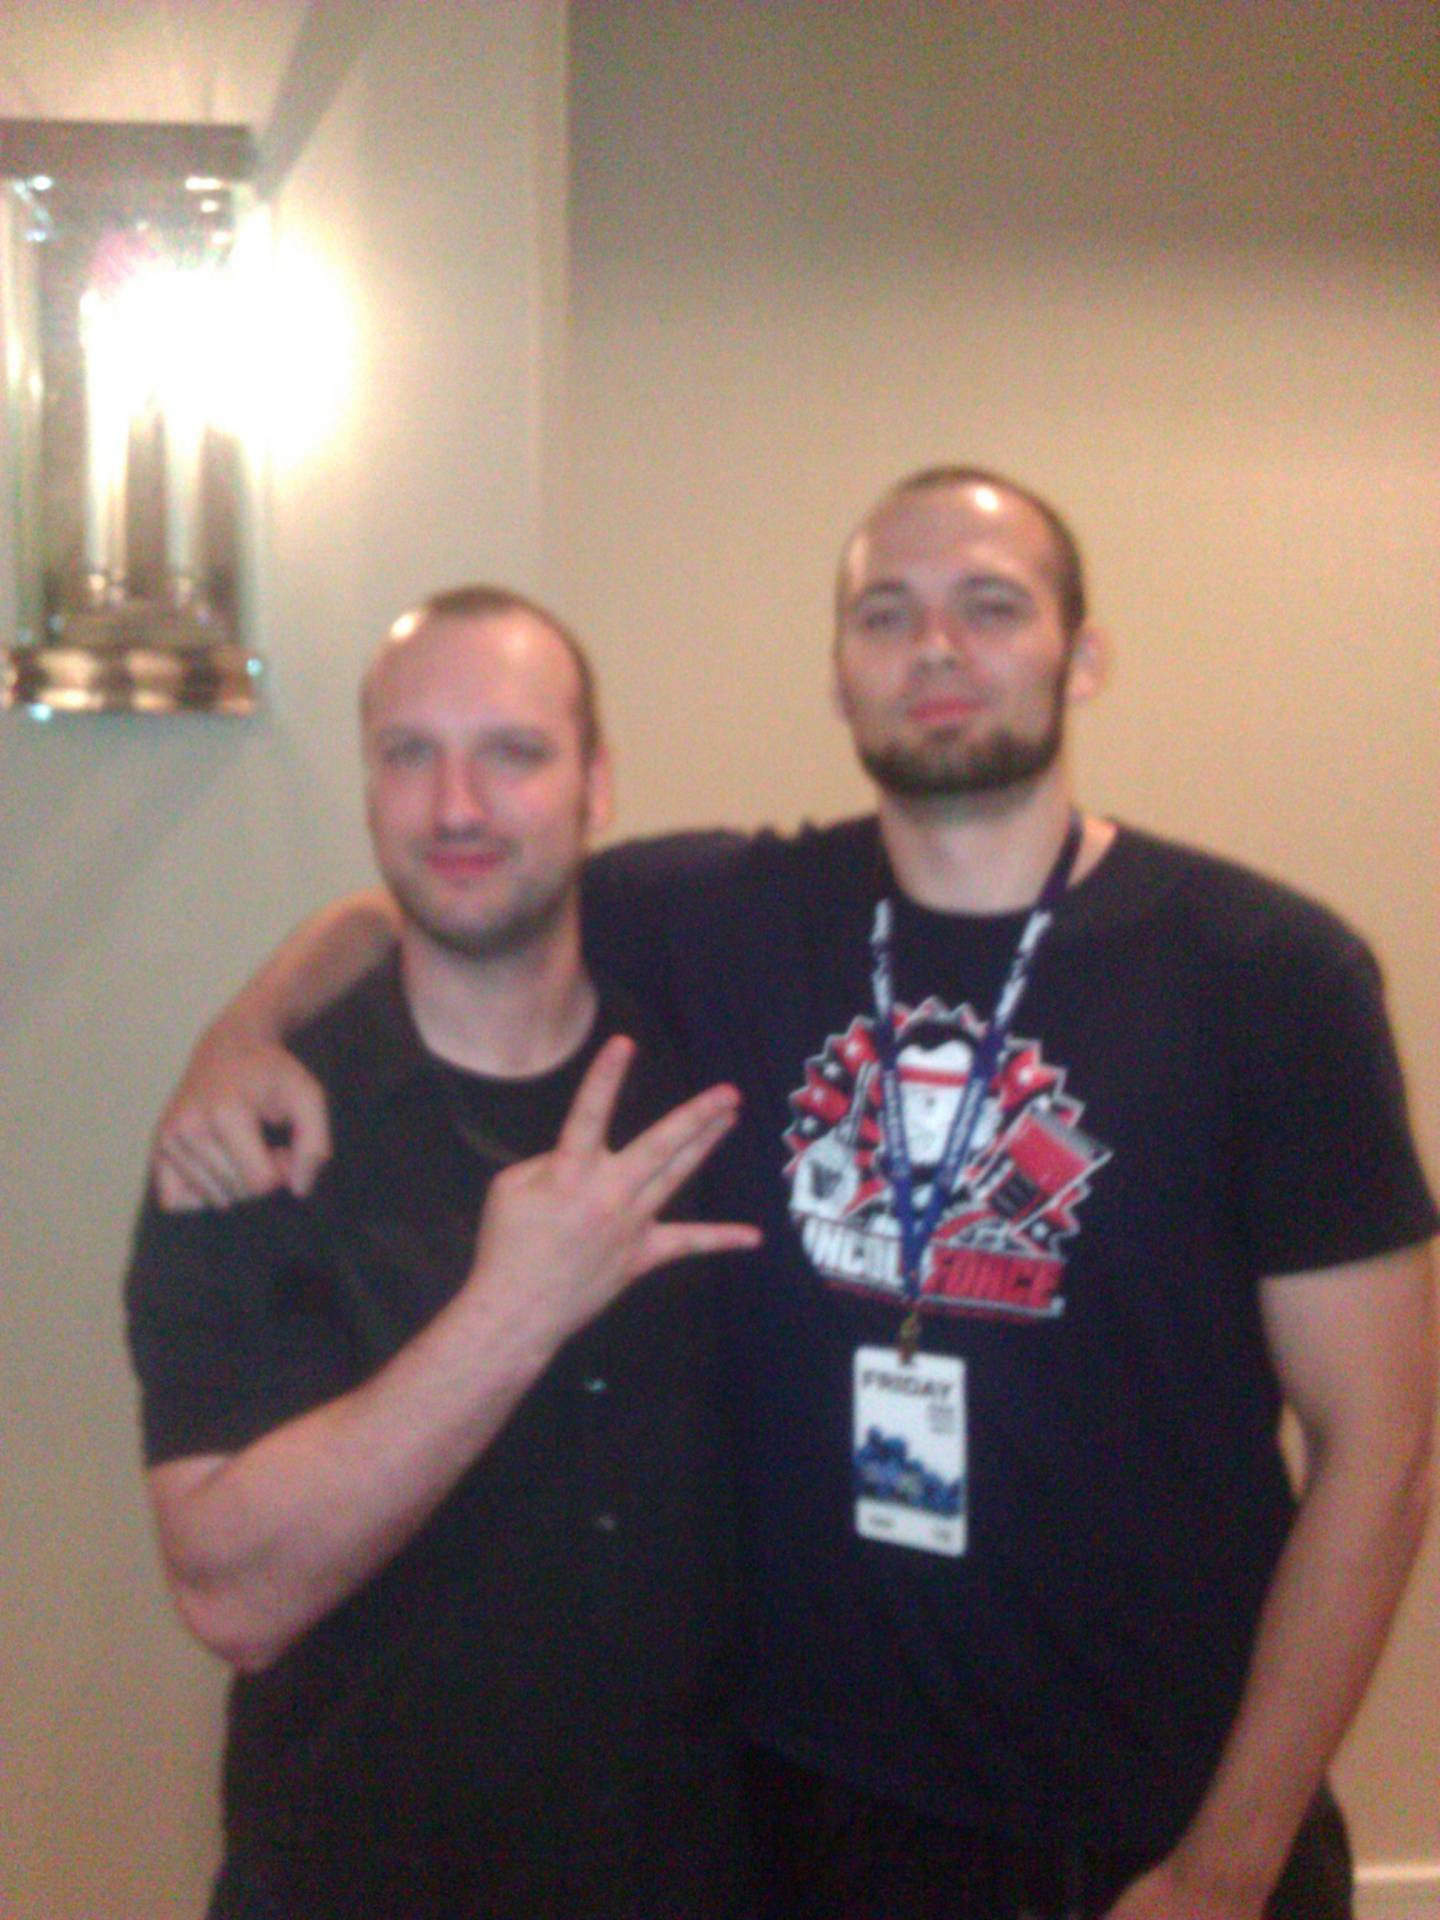 Last but not least in the Giantbomb crew was Vinny, he was super nice, very out going, and actually took the time to talk Warhammer 40k with me for about twenty minutes, it was a great experience followed by a great picture!